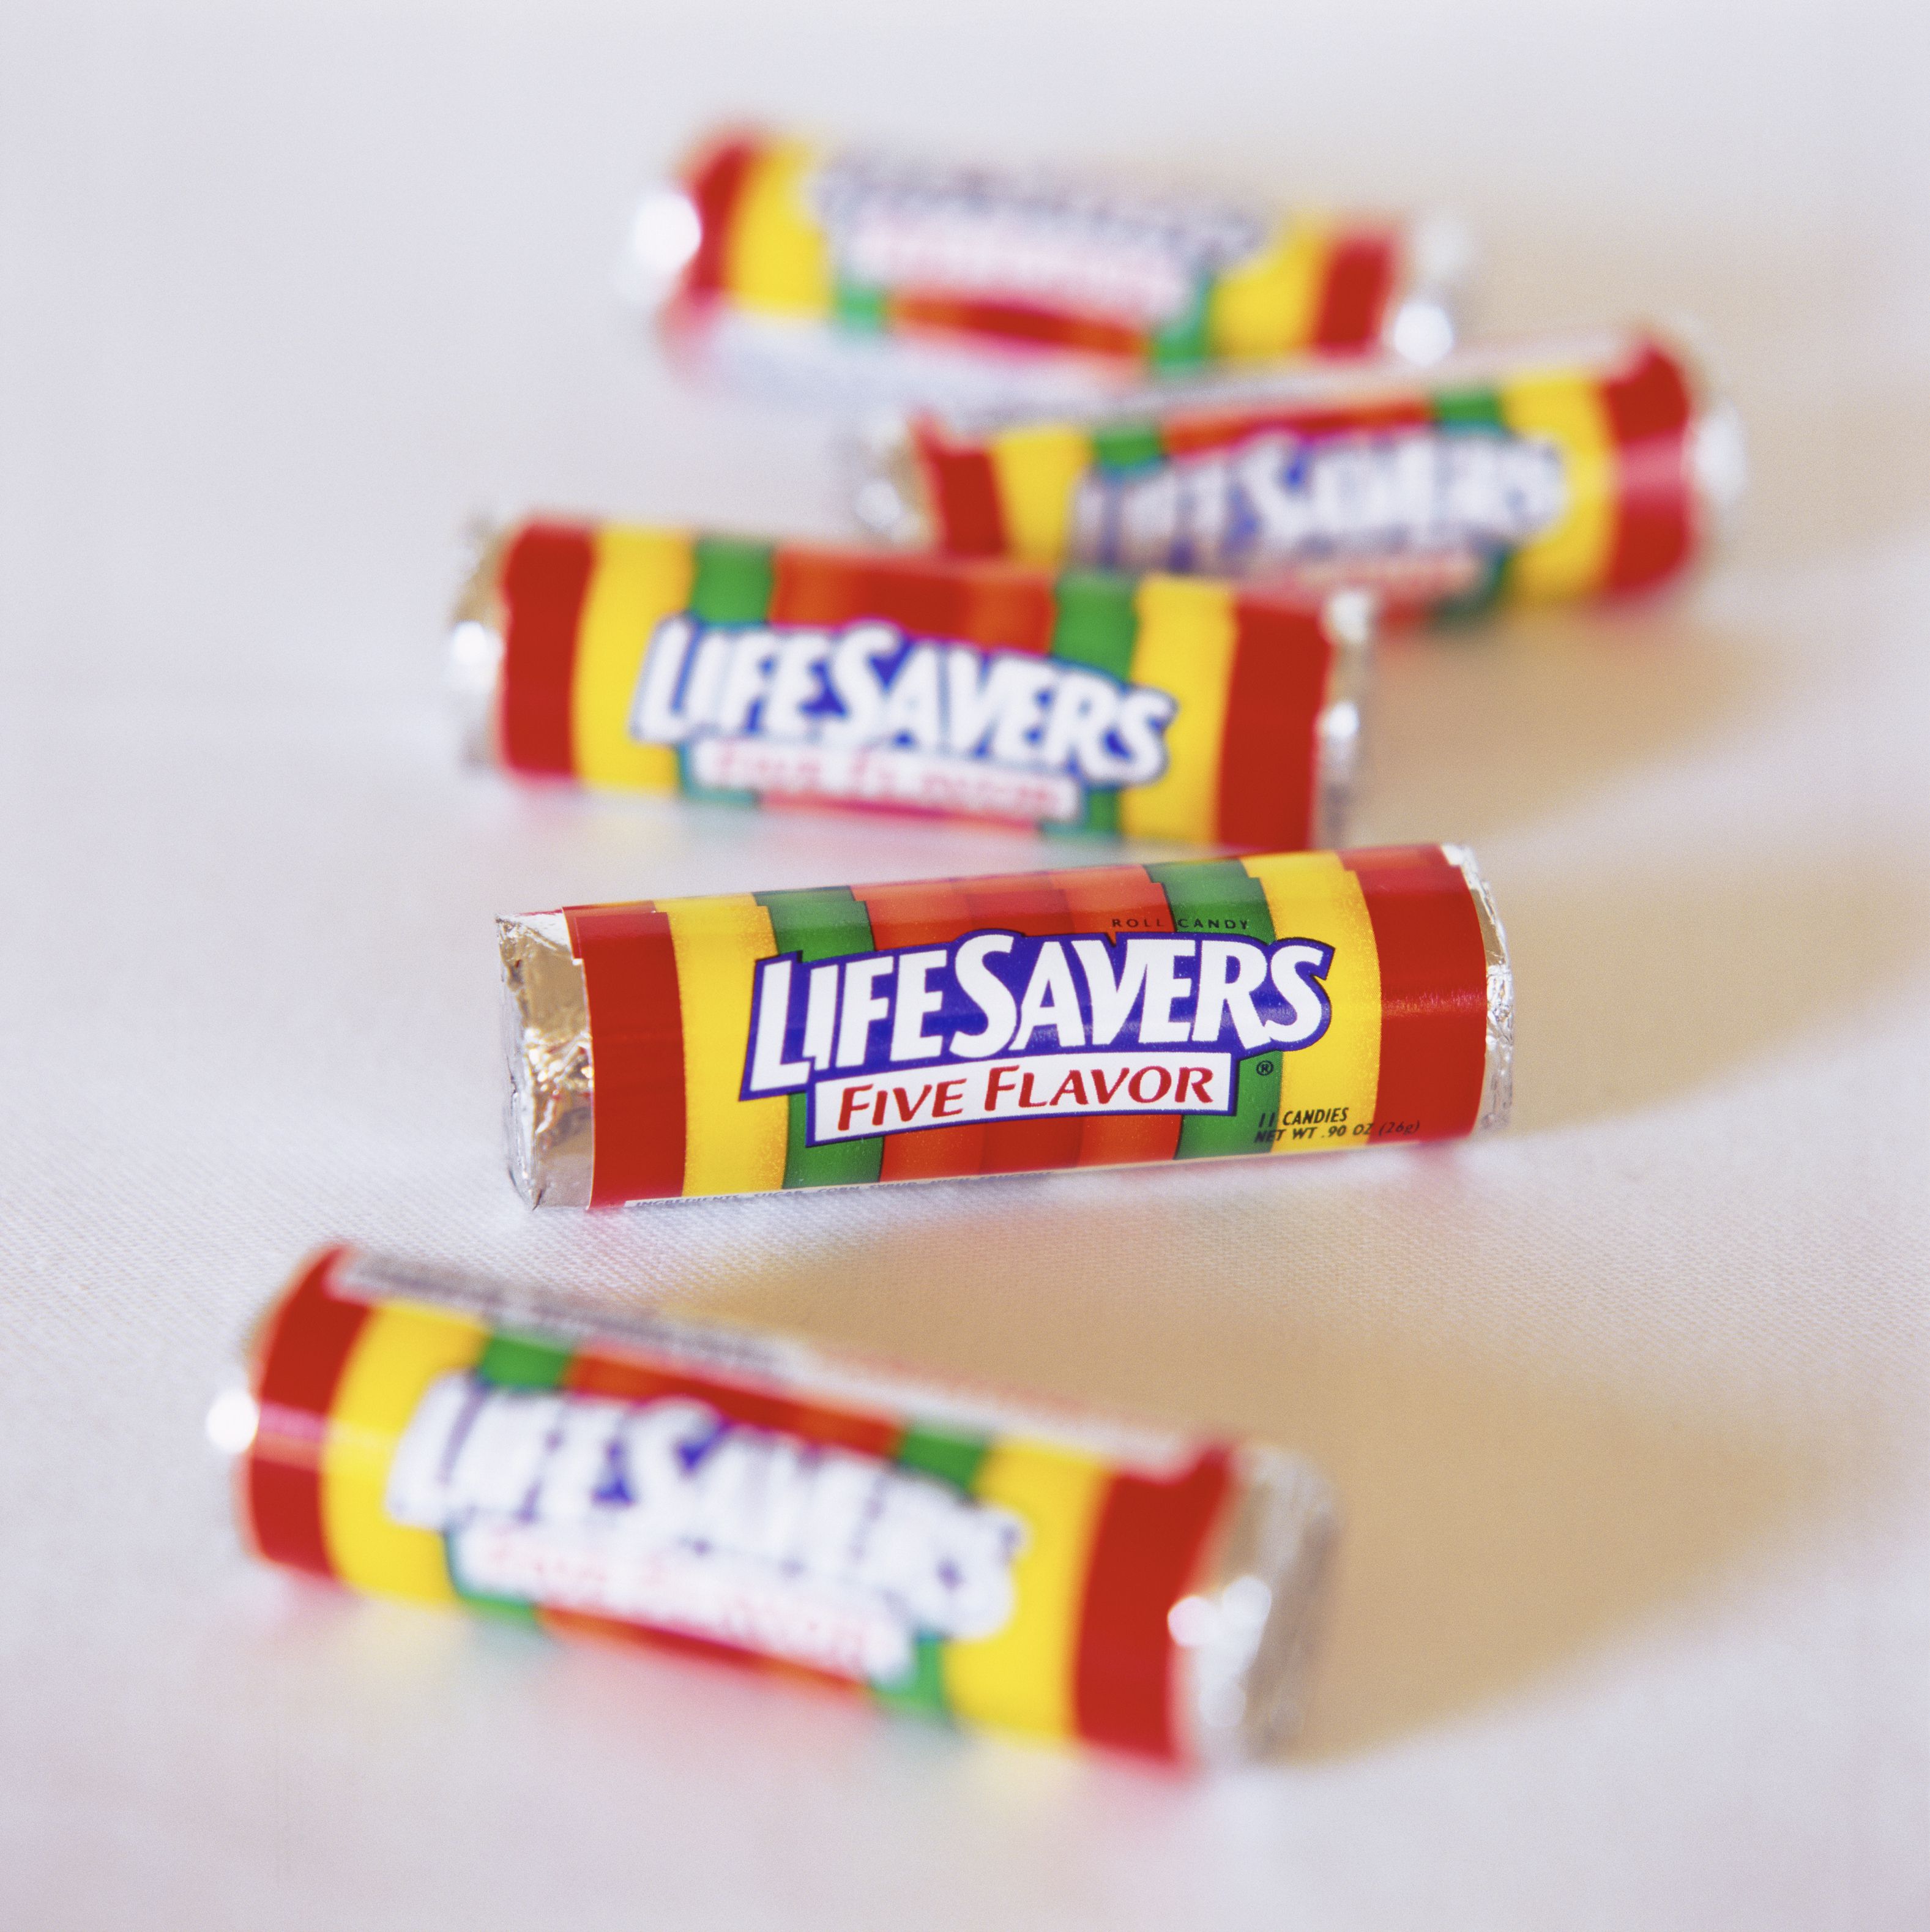 picture of a life saver candy